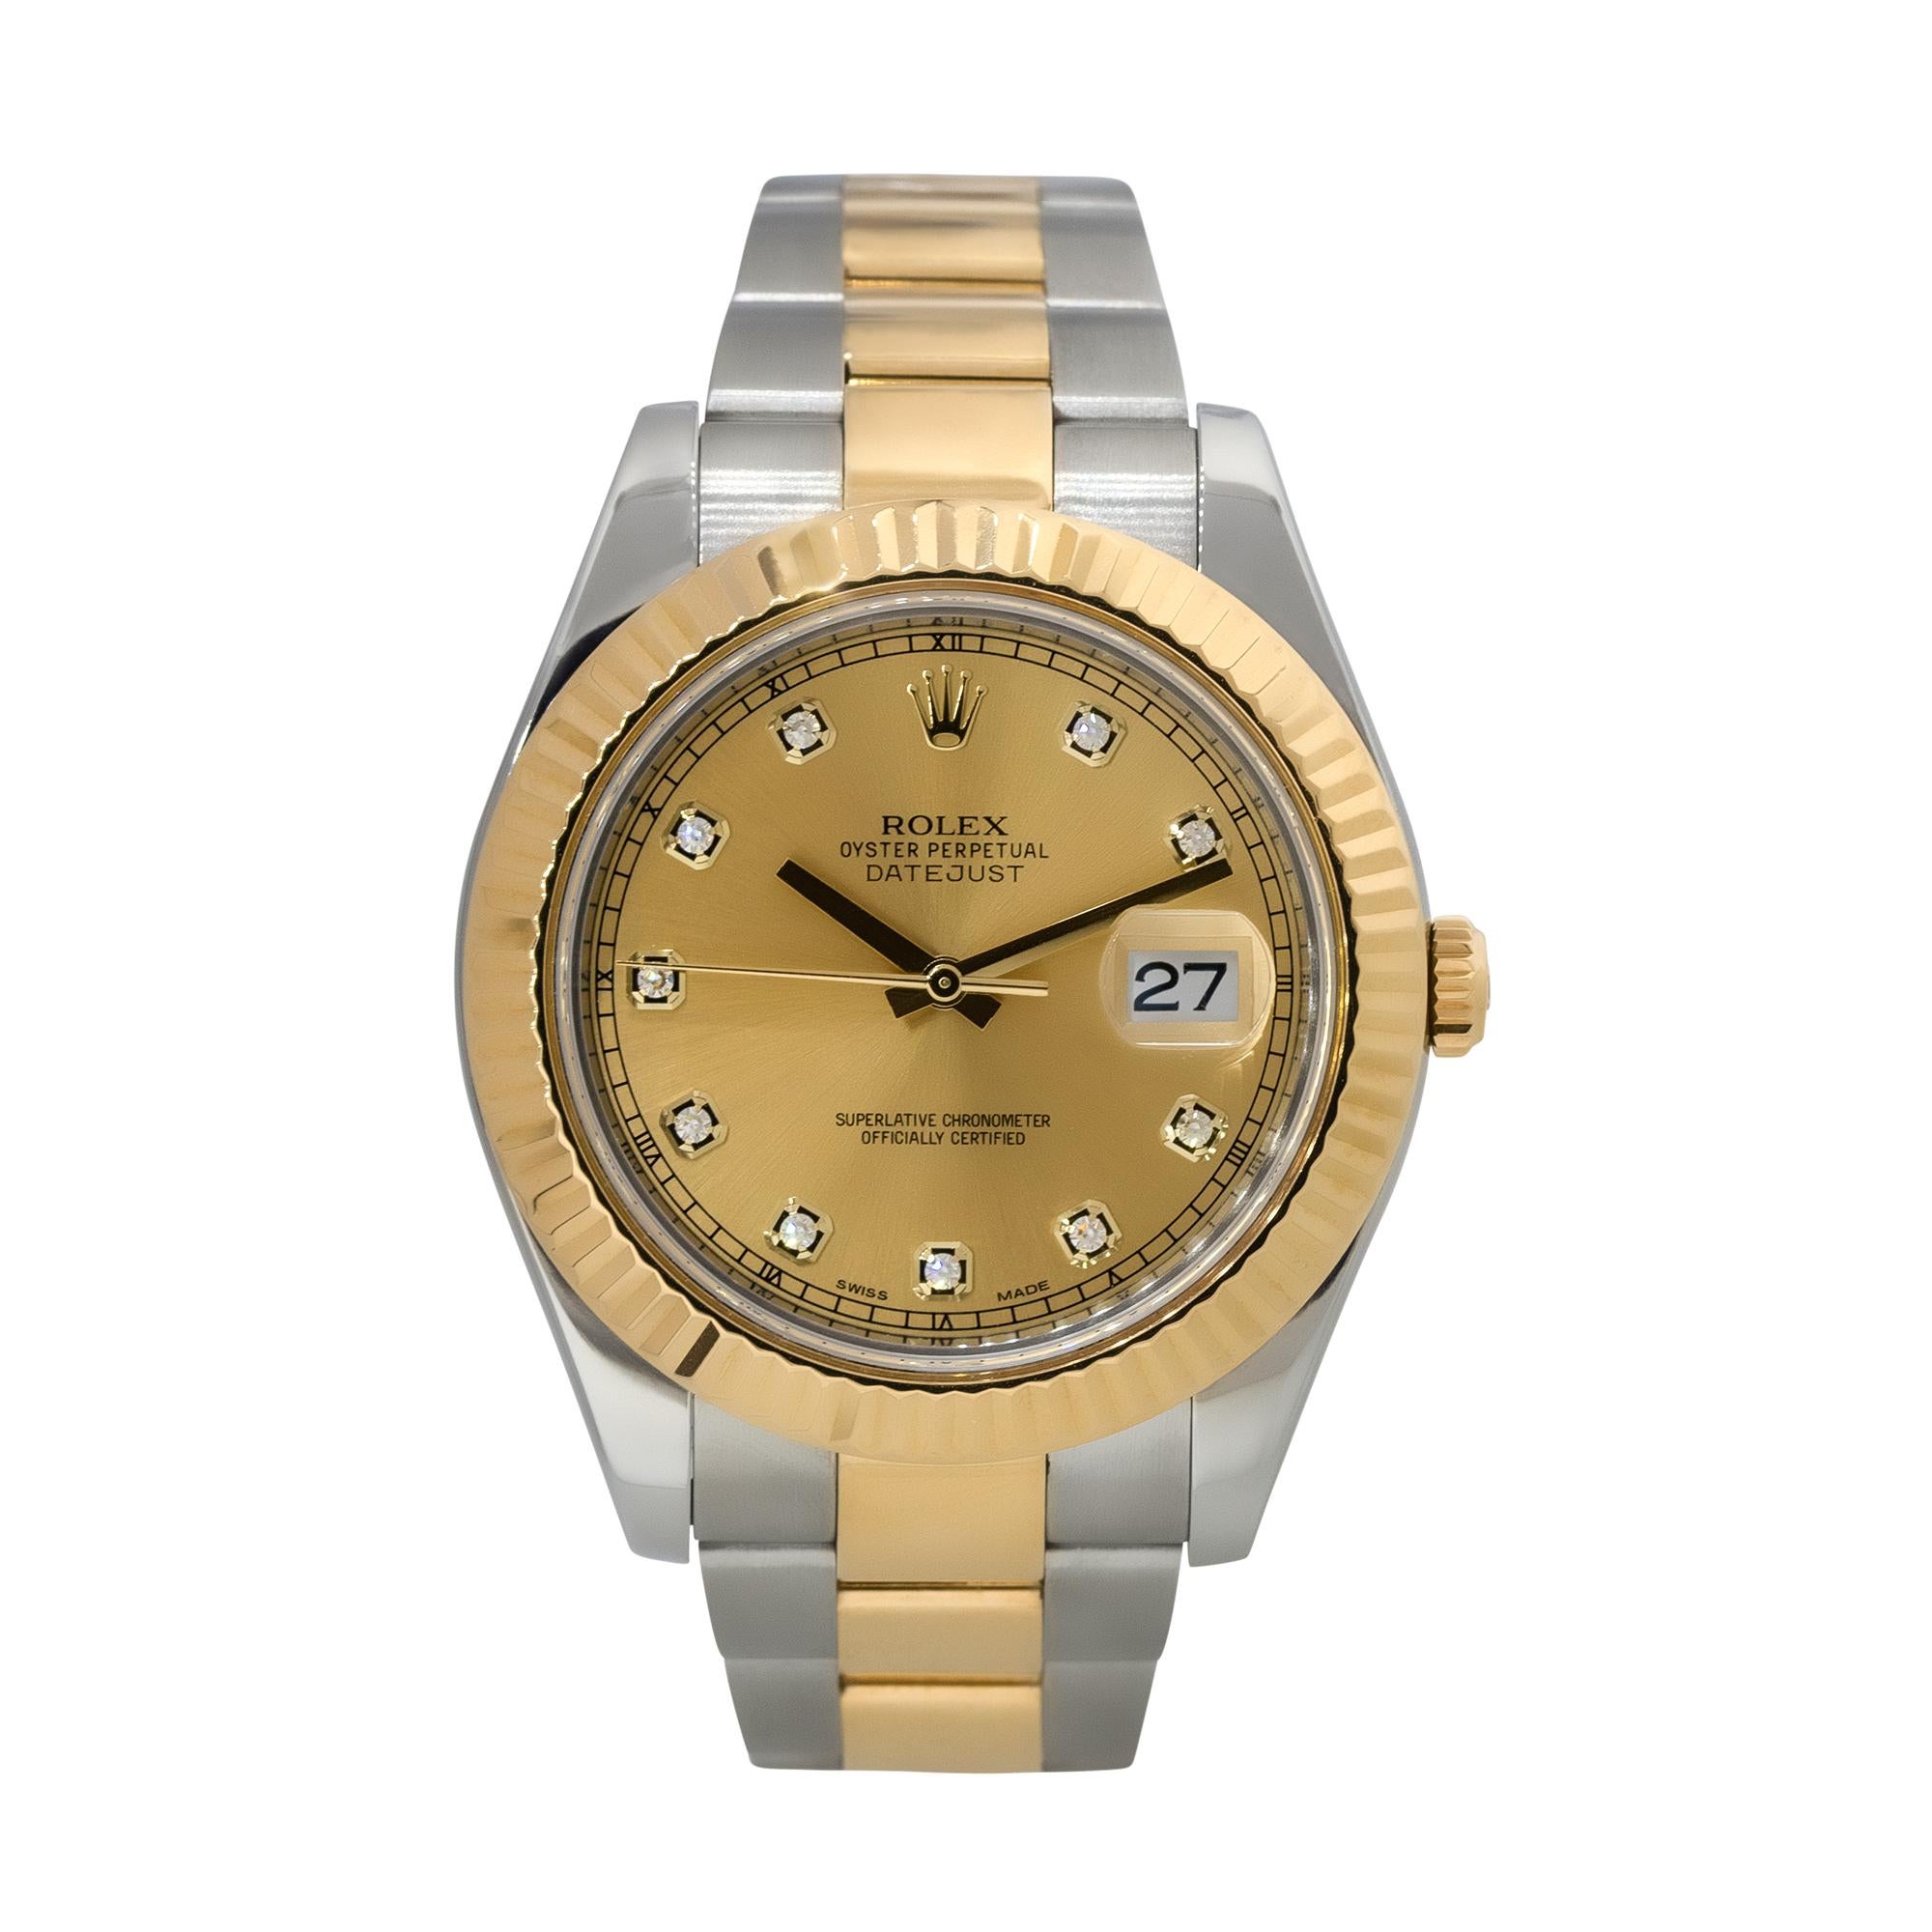 Brand: Rolex
MPN: 116333
Model: Datejust II
Case Material: Stainless Steel
Case Diameter: 41mm
Crystal: Sapphire Crystal
Bezel: 18k Yellow gold fluted bezel
Dial: Factory Champagne dial with yellow gold hands and Diamond hour markers. Date can be